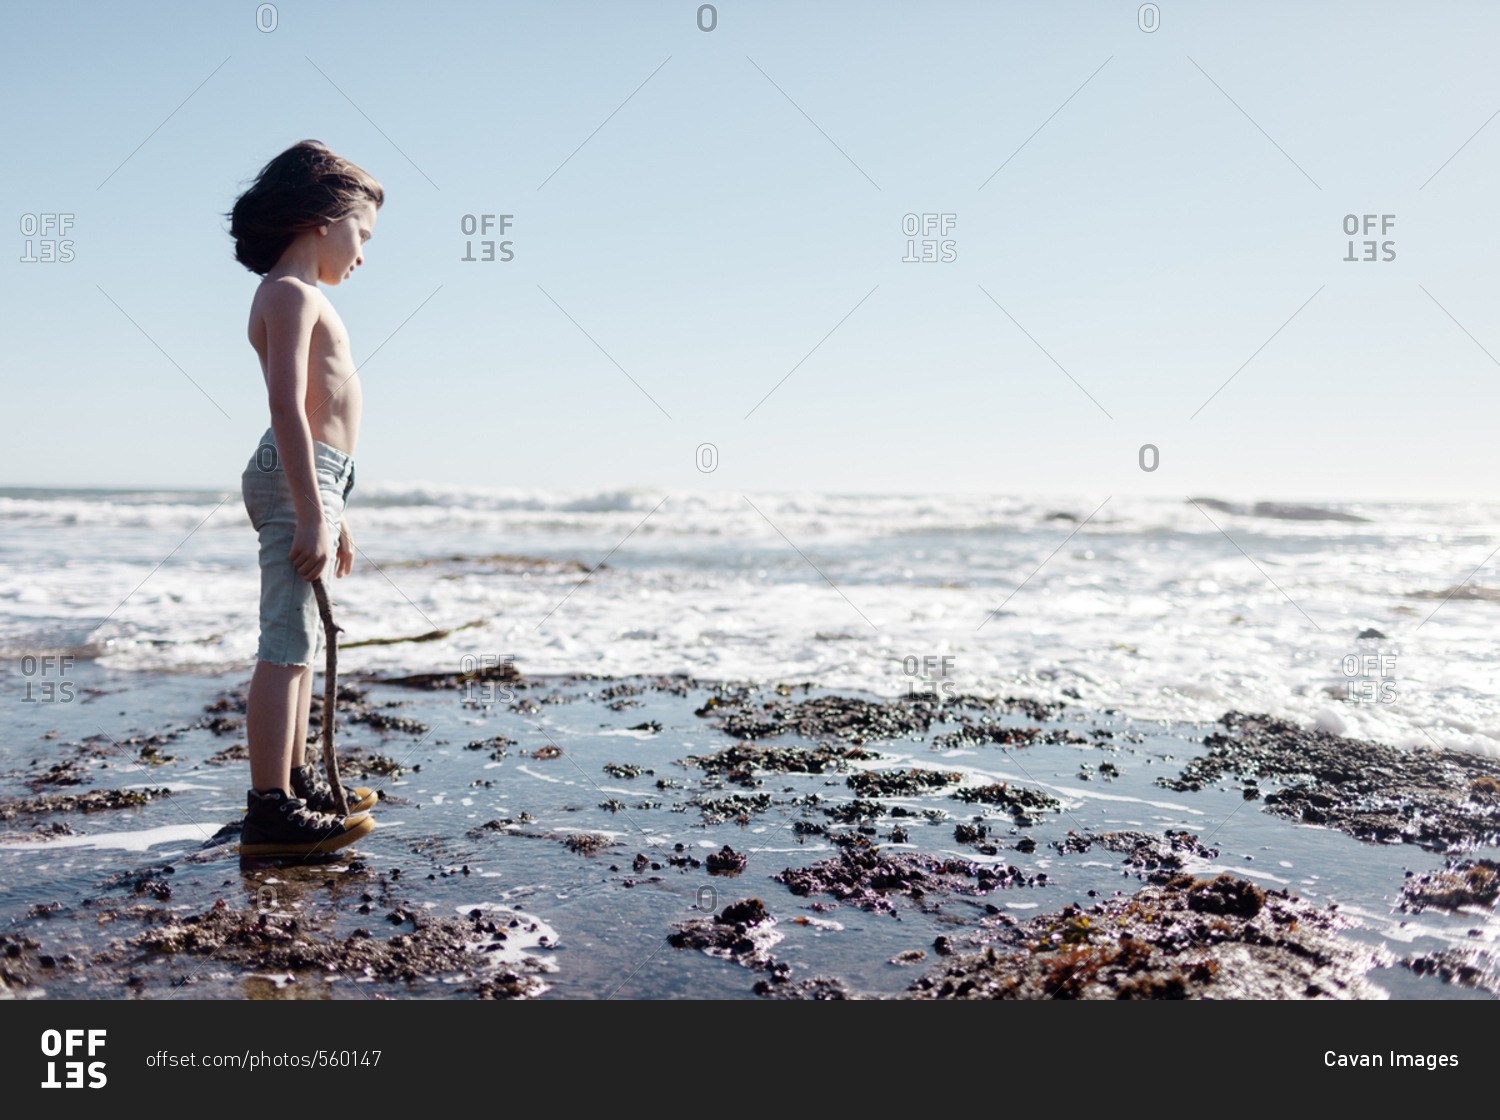 Side view of shirtless boy holding stick standing at beach against clear sky during sunny day